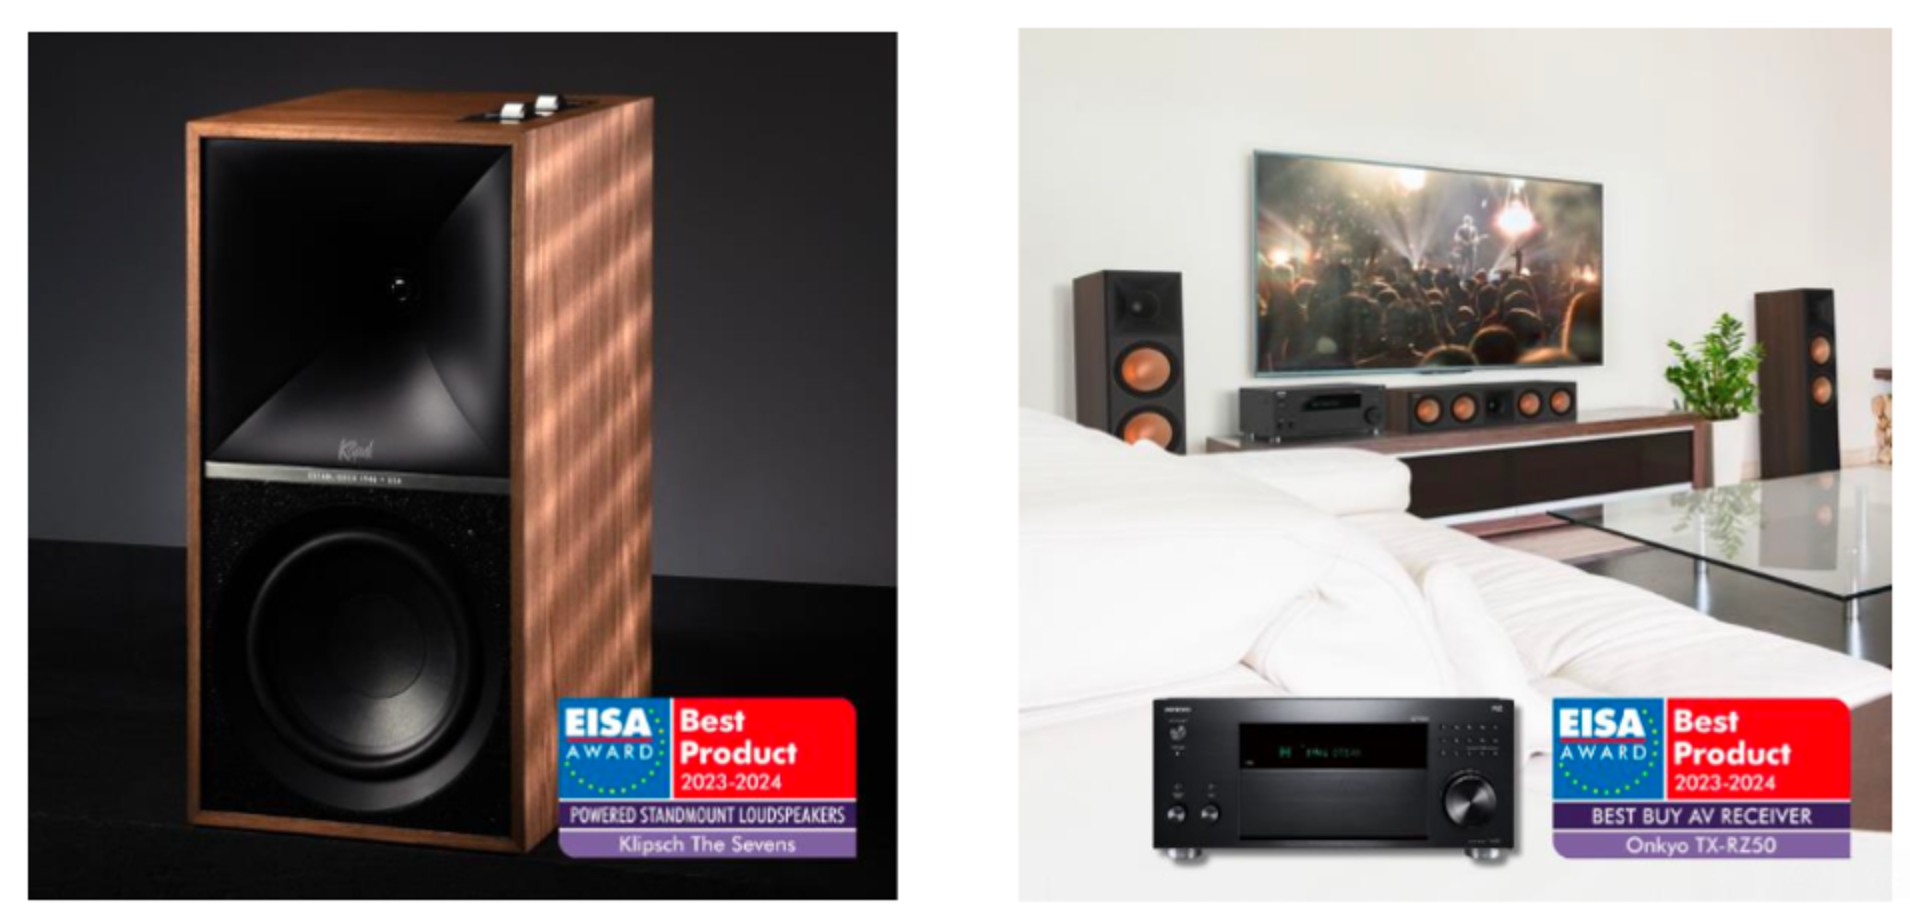 Two EISA awards for Klipsch and Onkyo